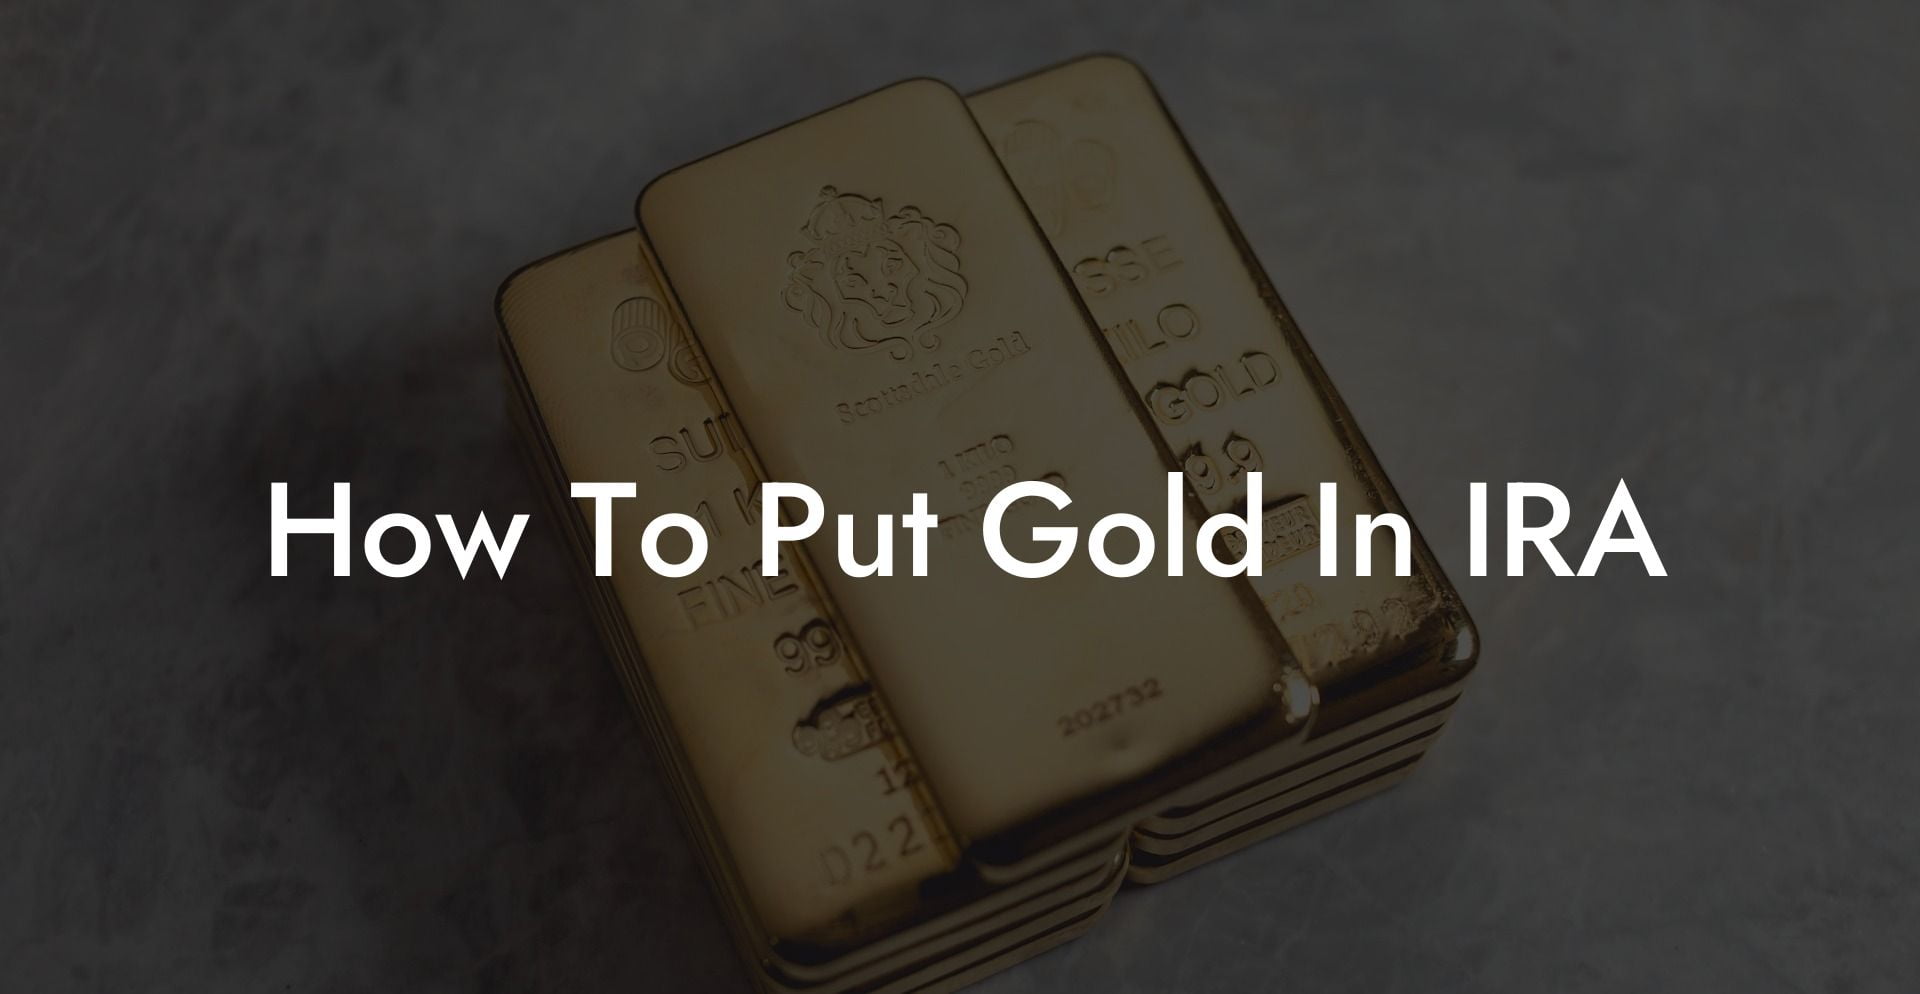 How To Put Gold In IRA